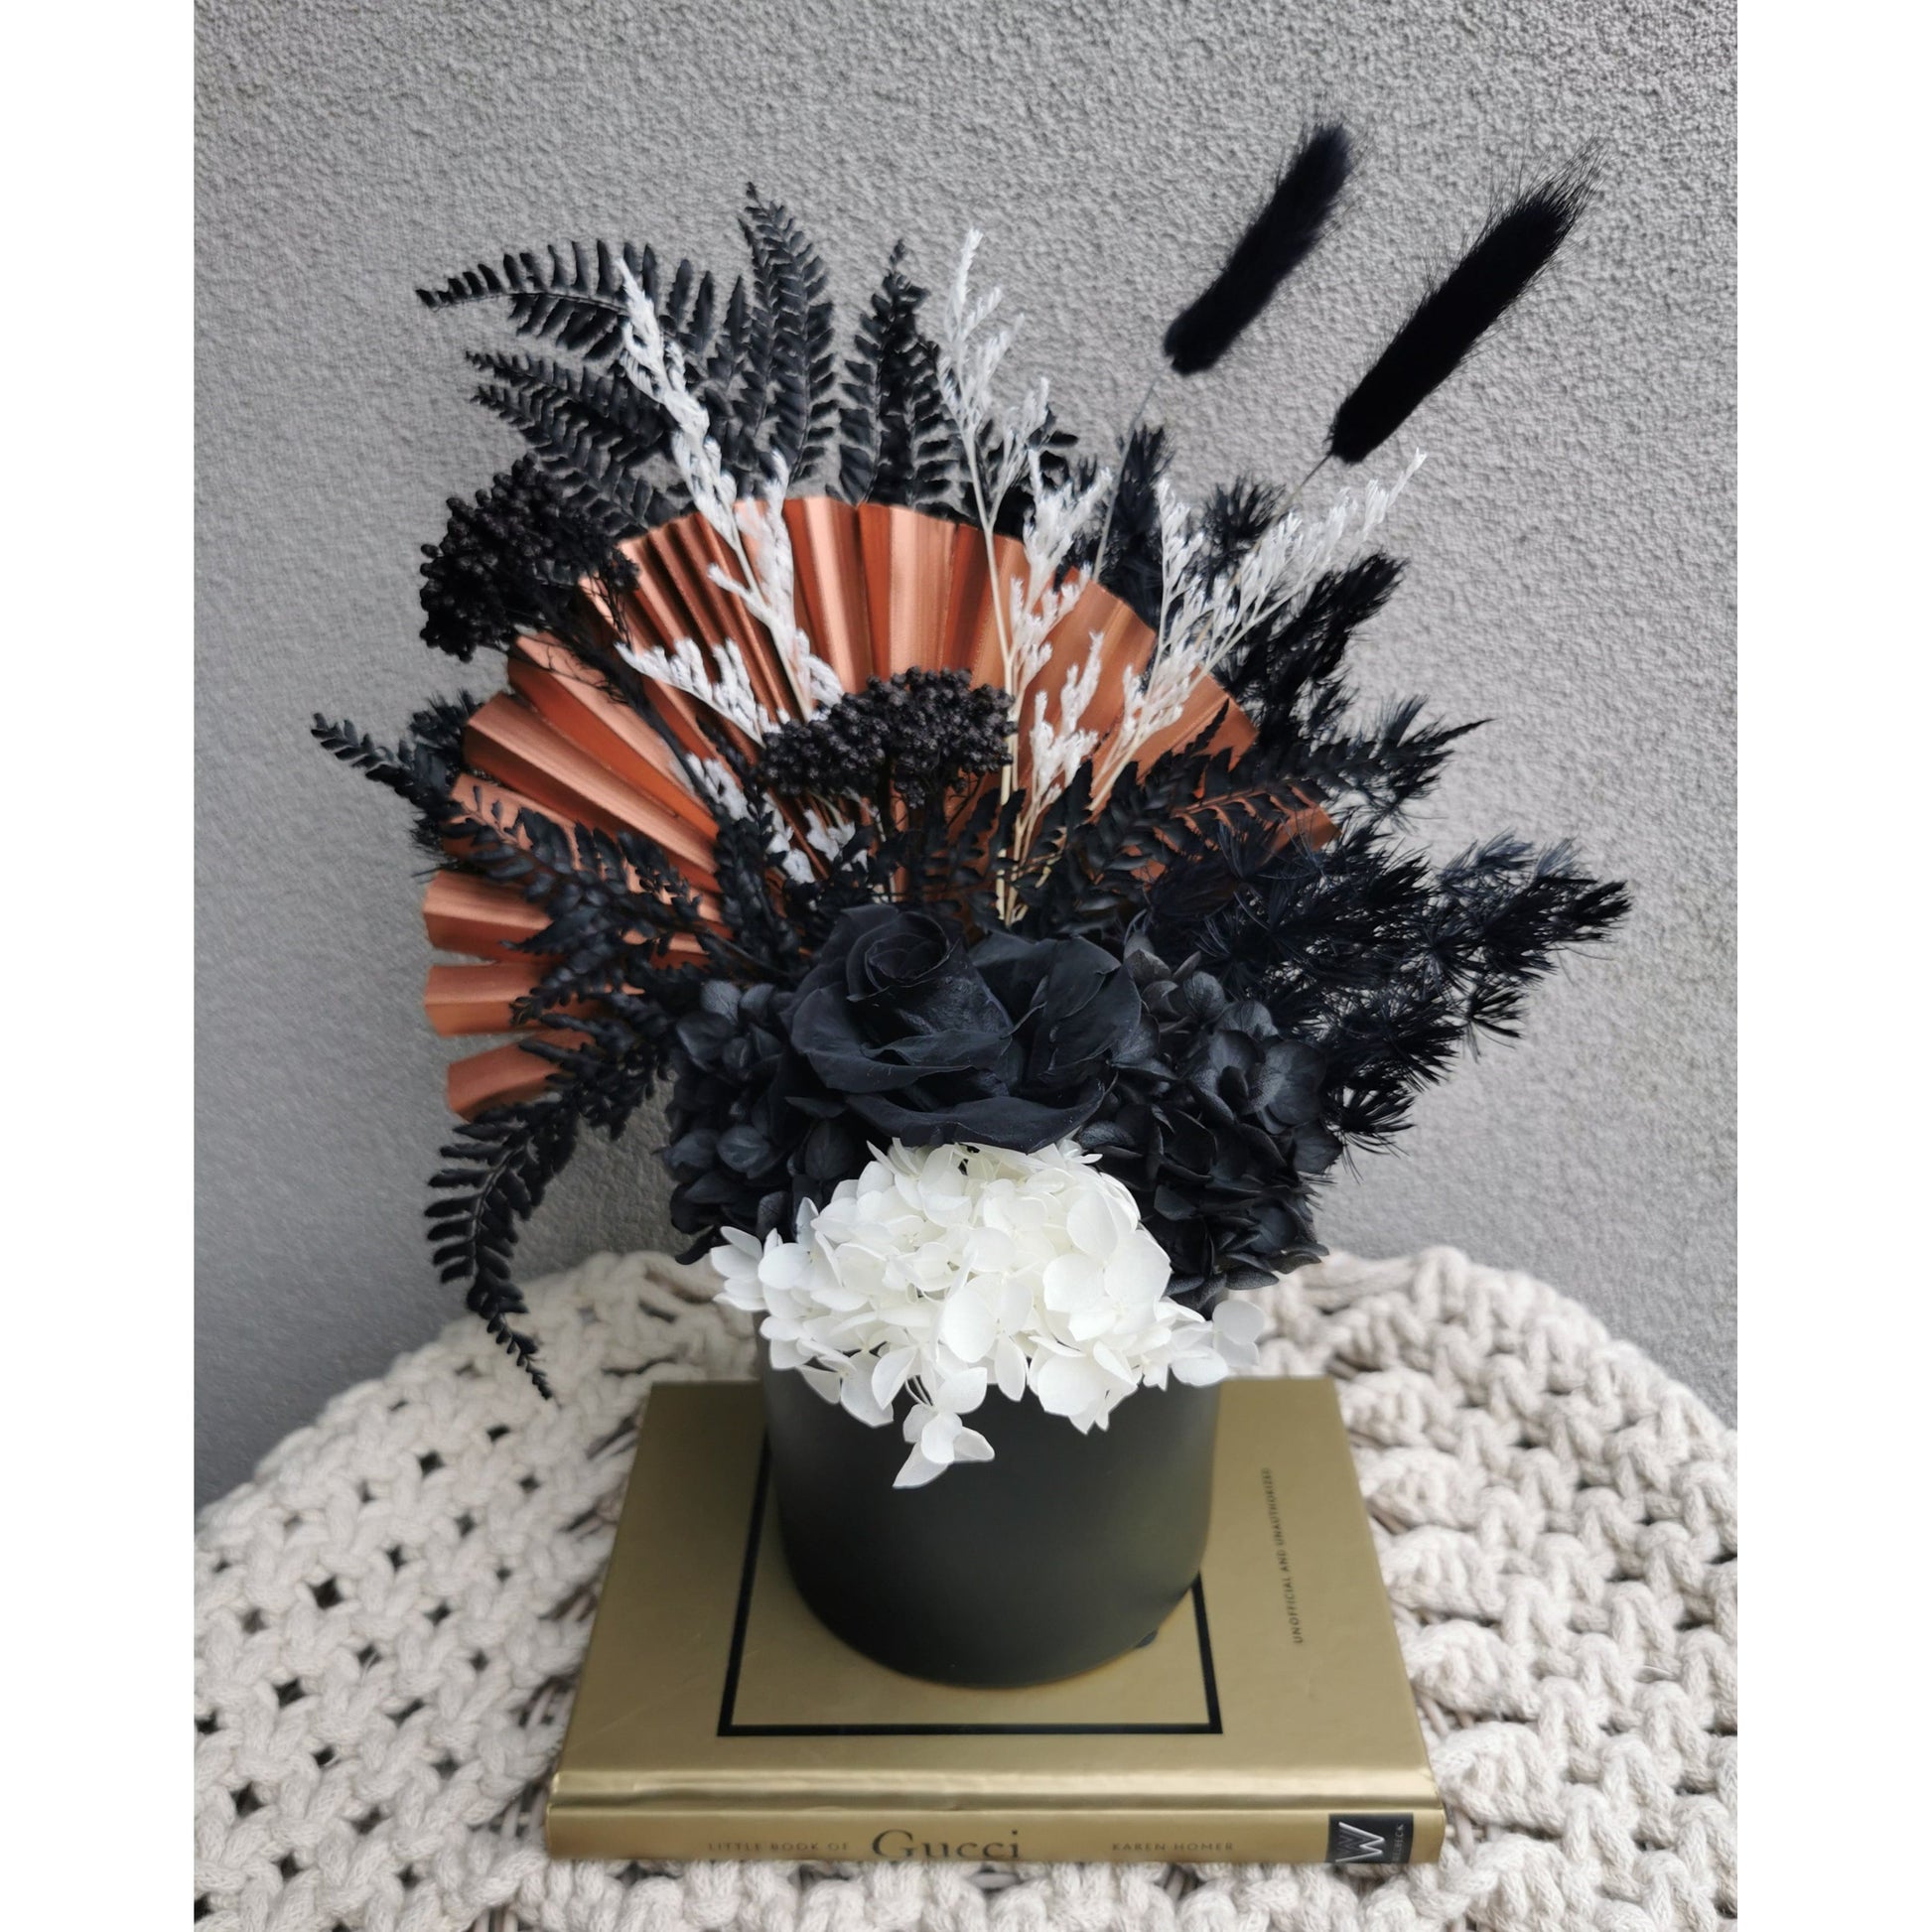 Dried & Preserved flower arrangement in black, white & copper colours. Photo shows arrangement sitting on a book on a table against a blank wall